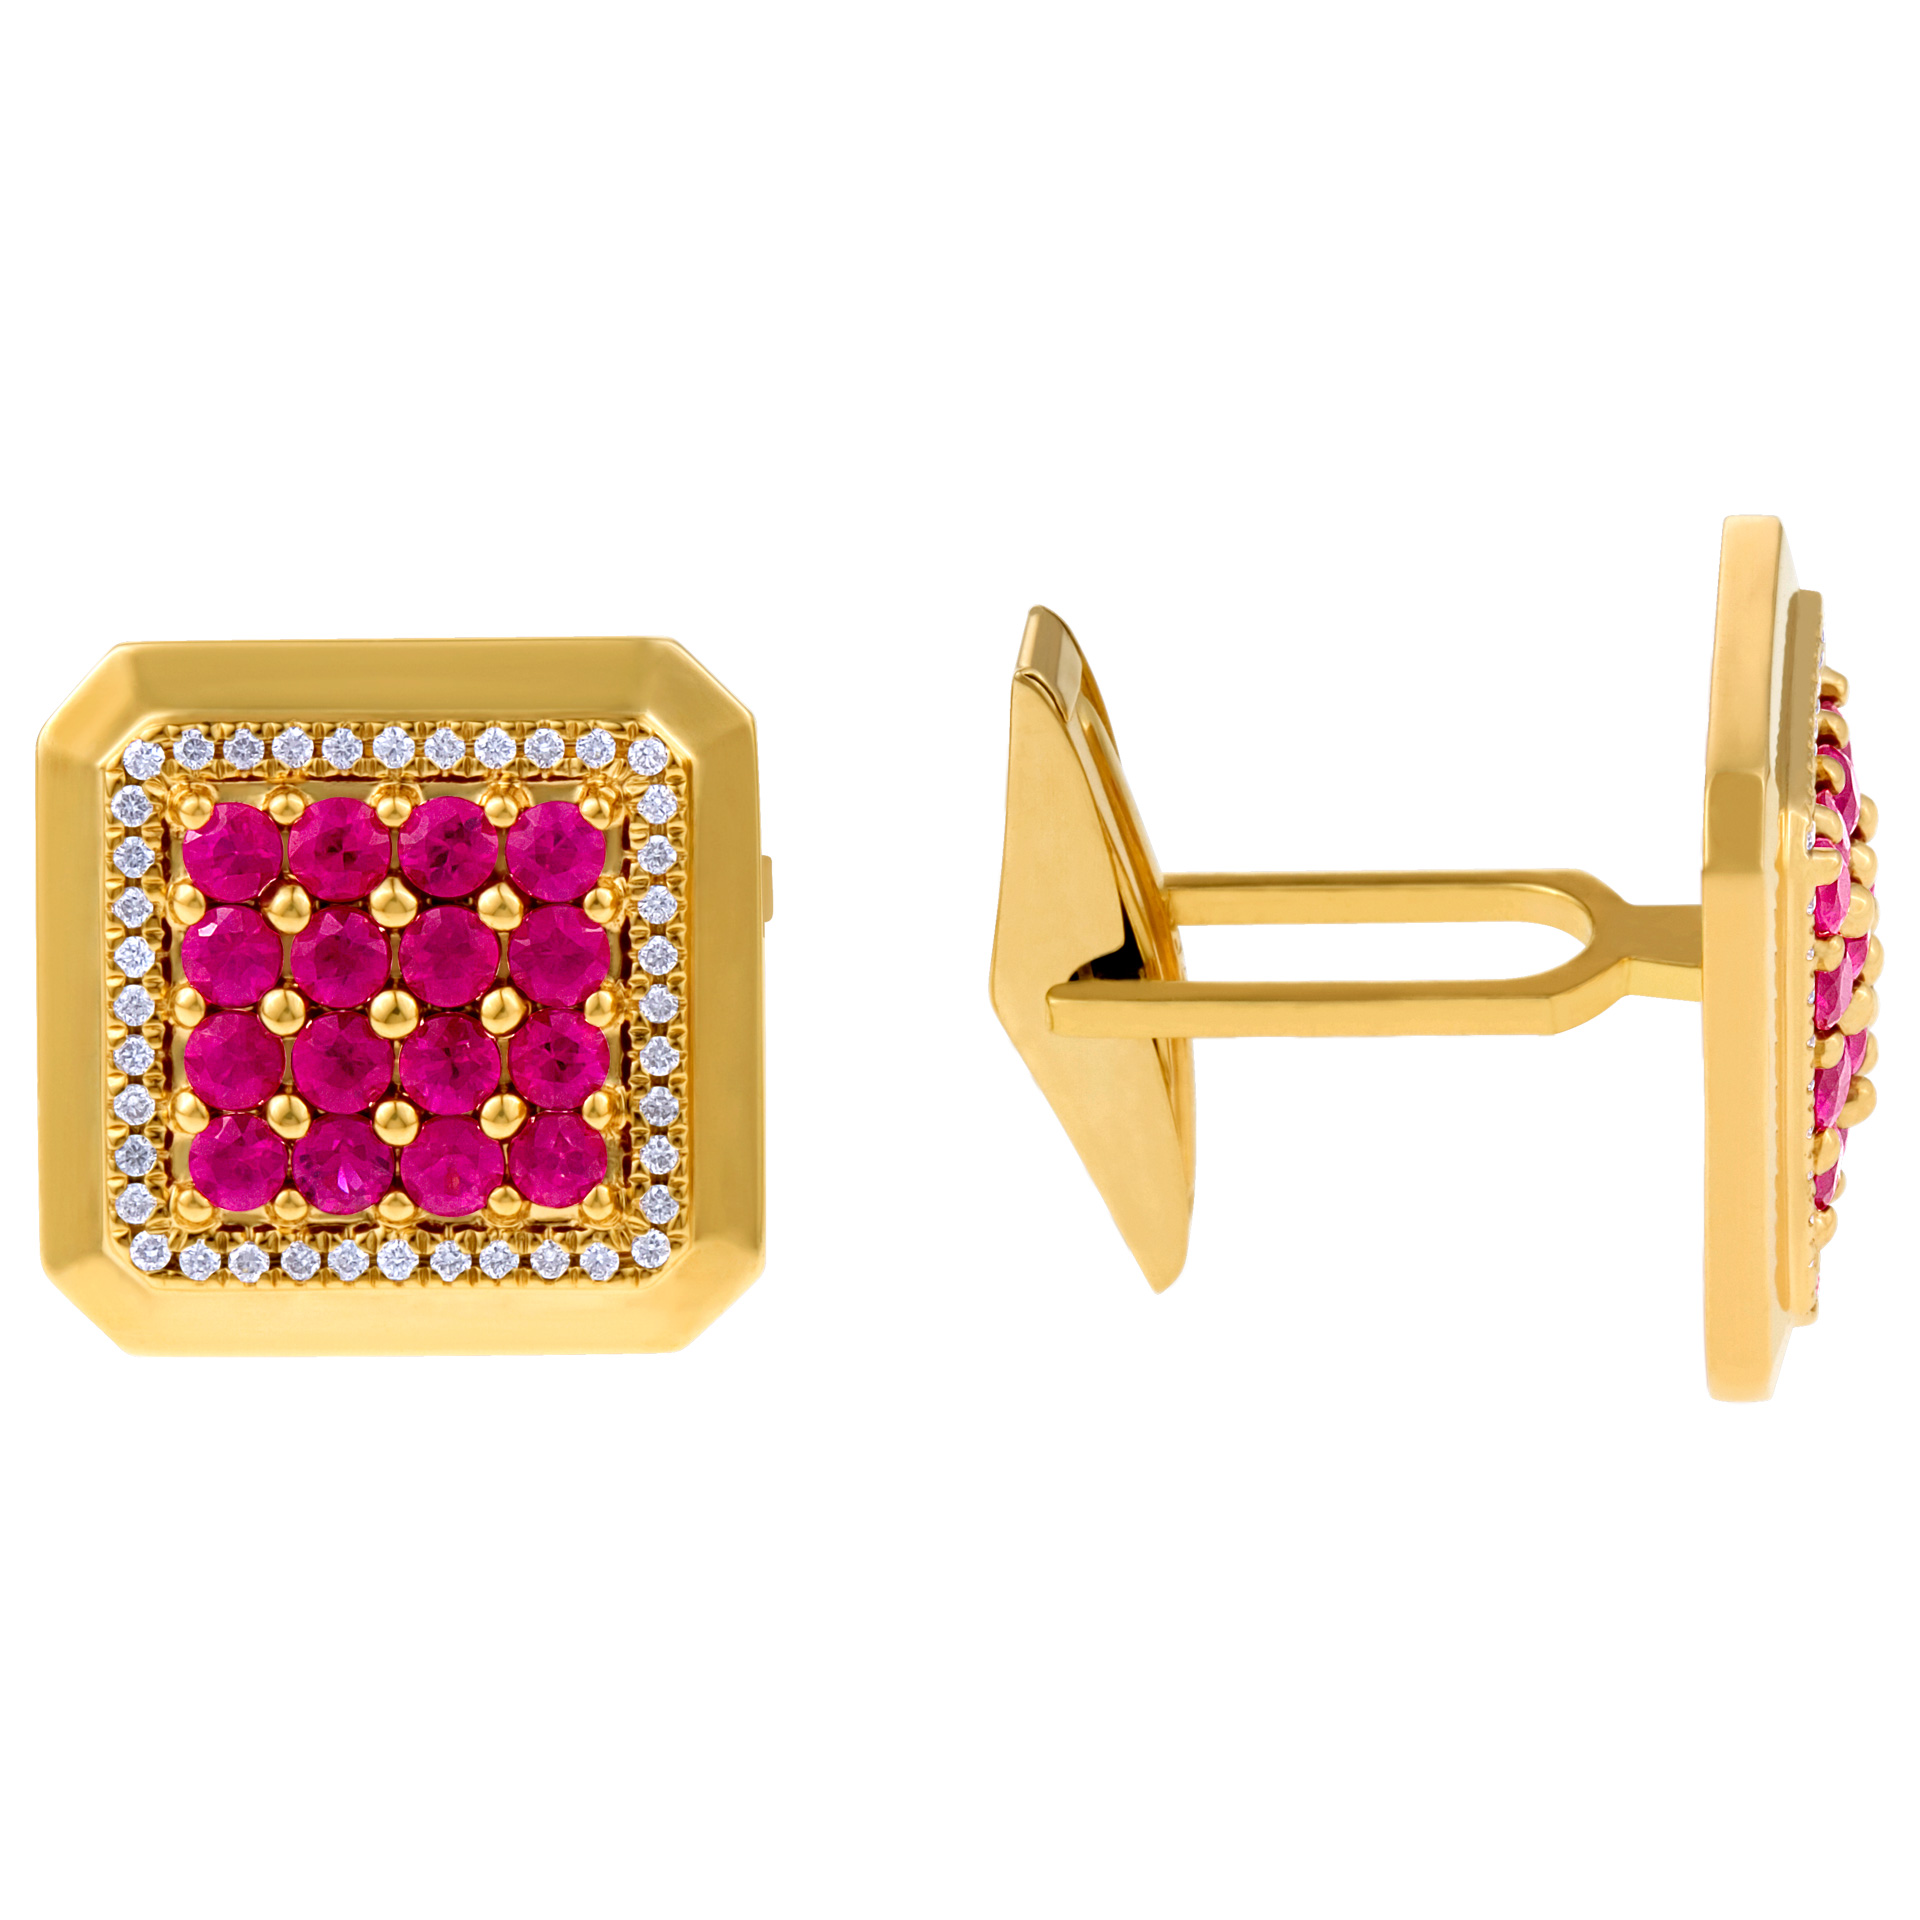 Exquisite diamond and ruby cufflinks in 18k yellow gold image 3